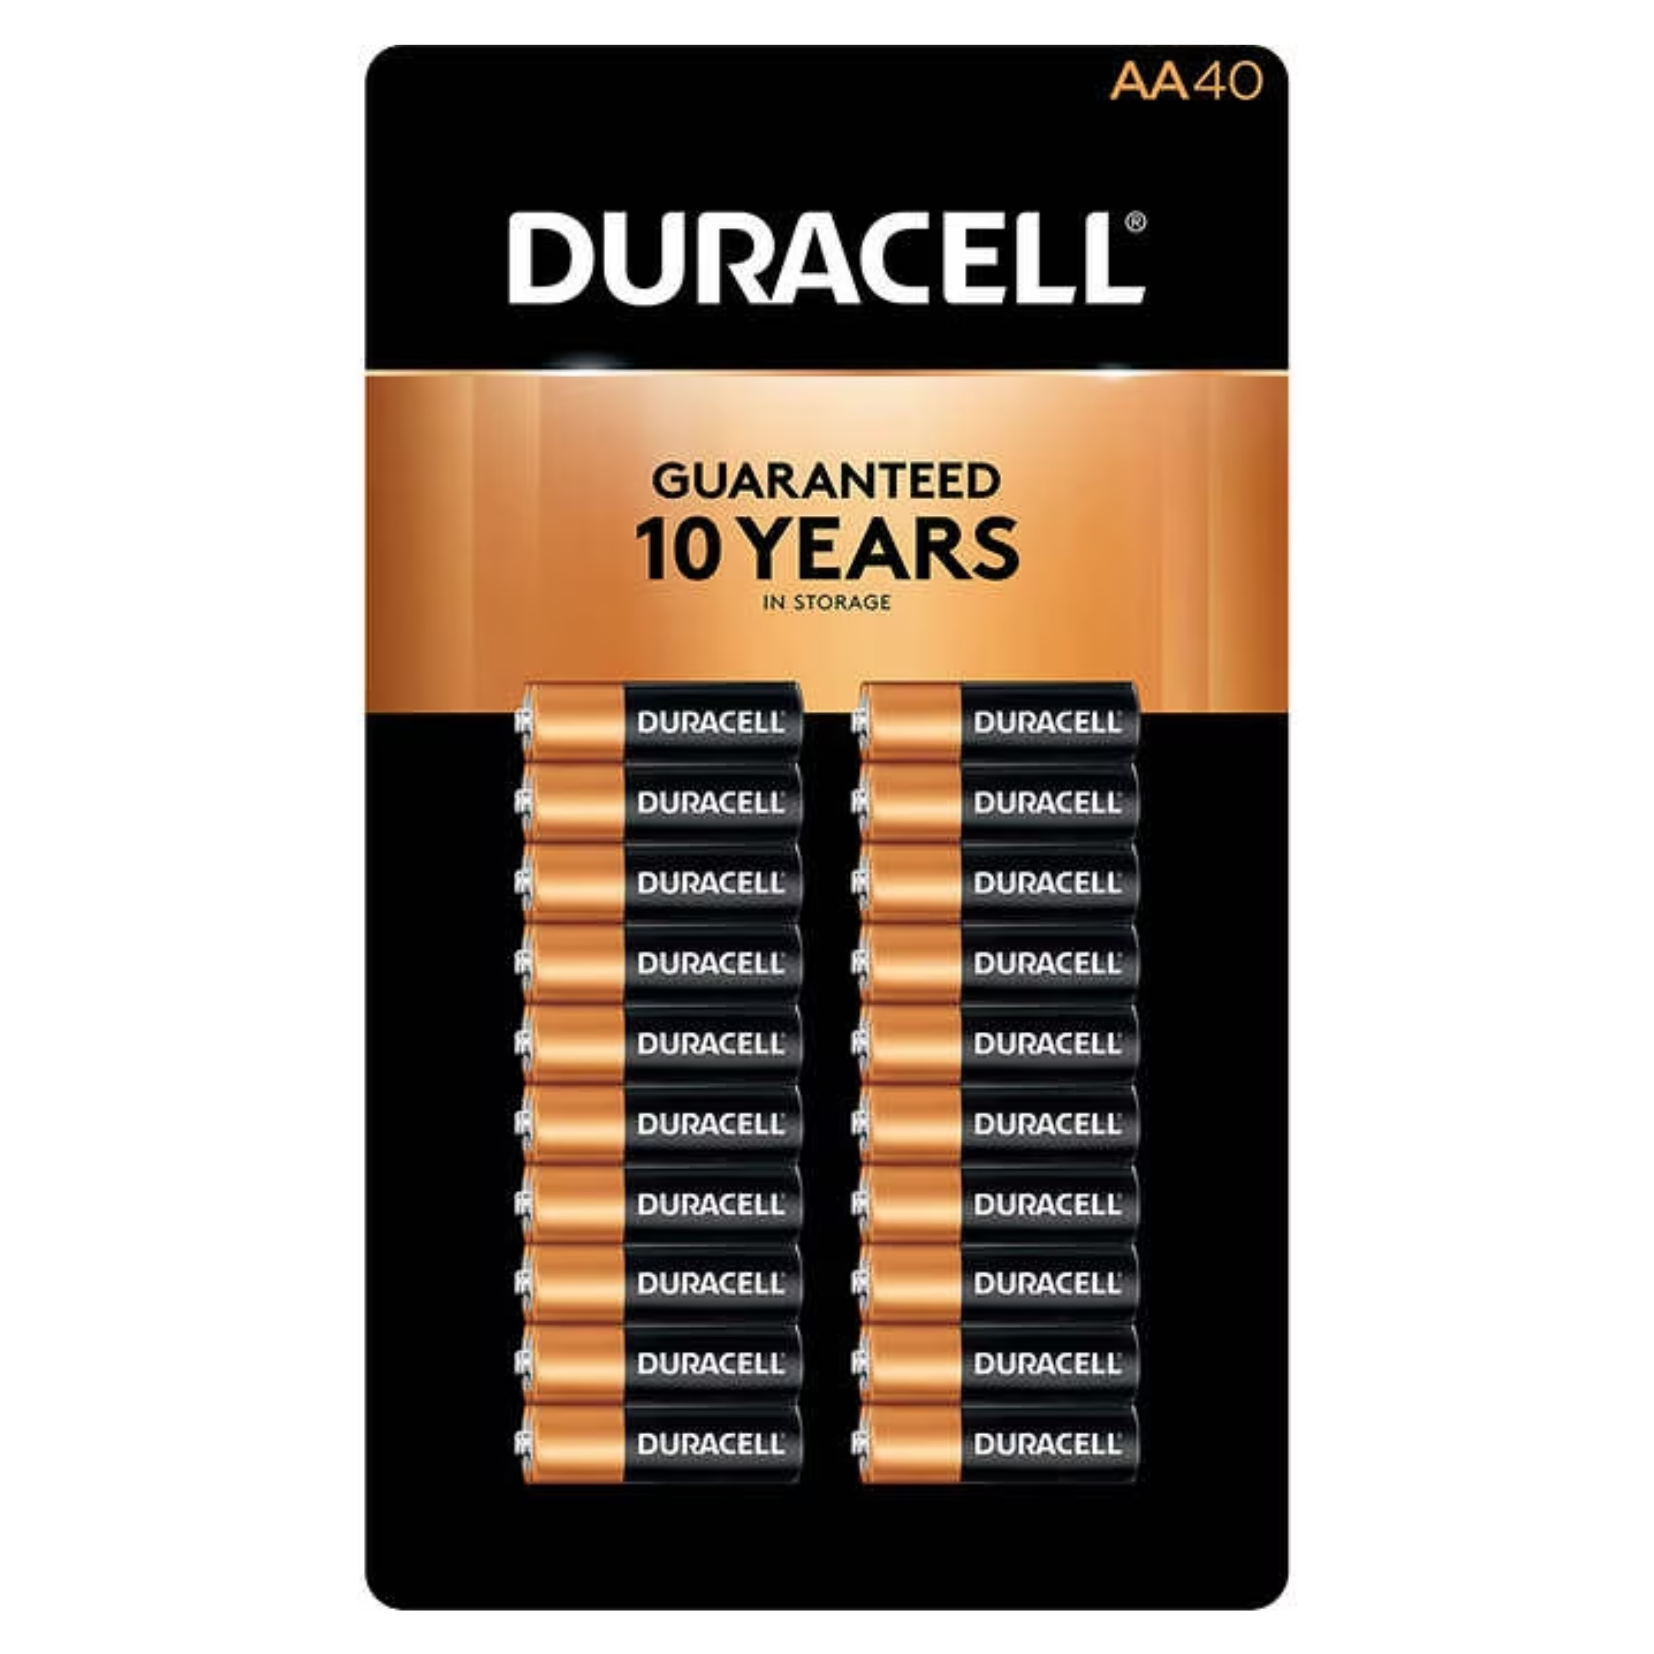 Duracell Batteries AA 40ct